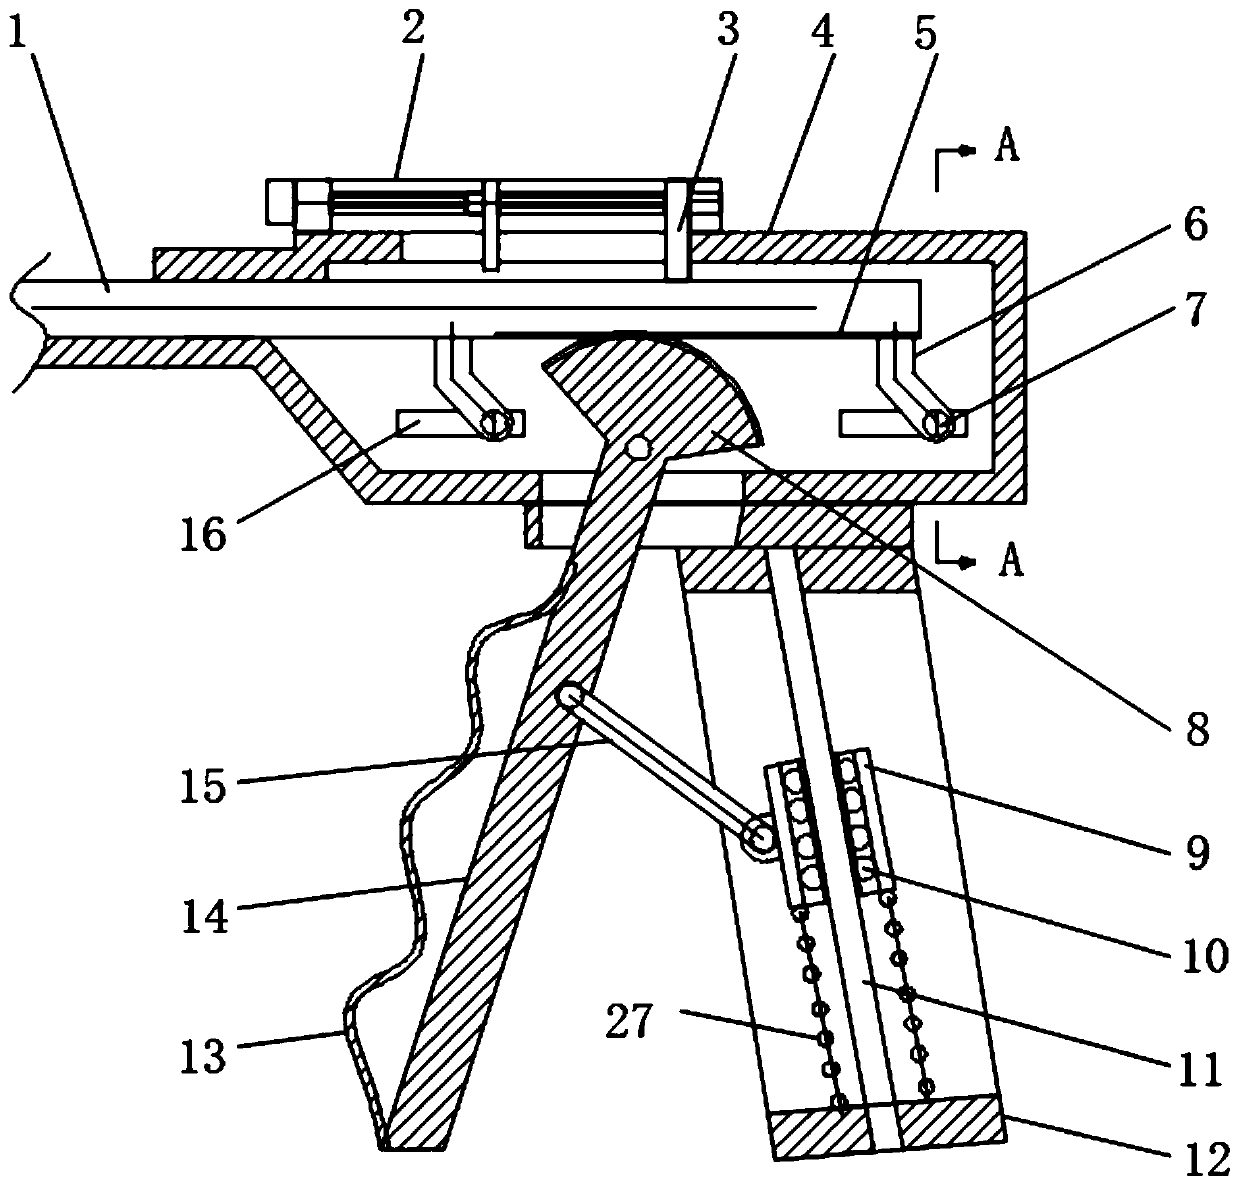 Self-anastomosing operating handle for surgical operation